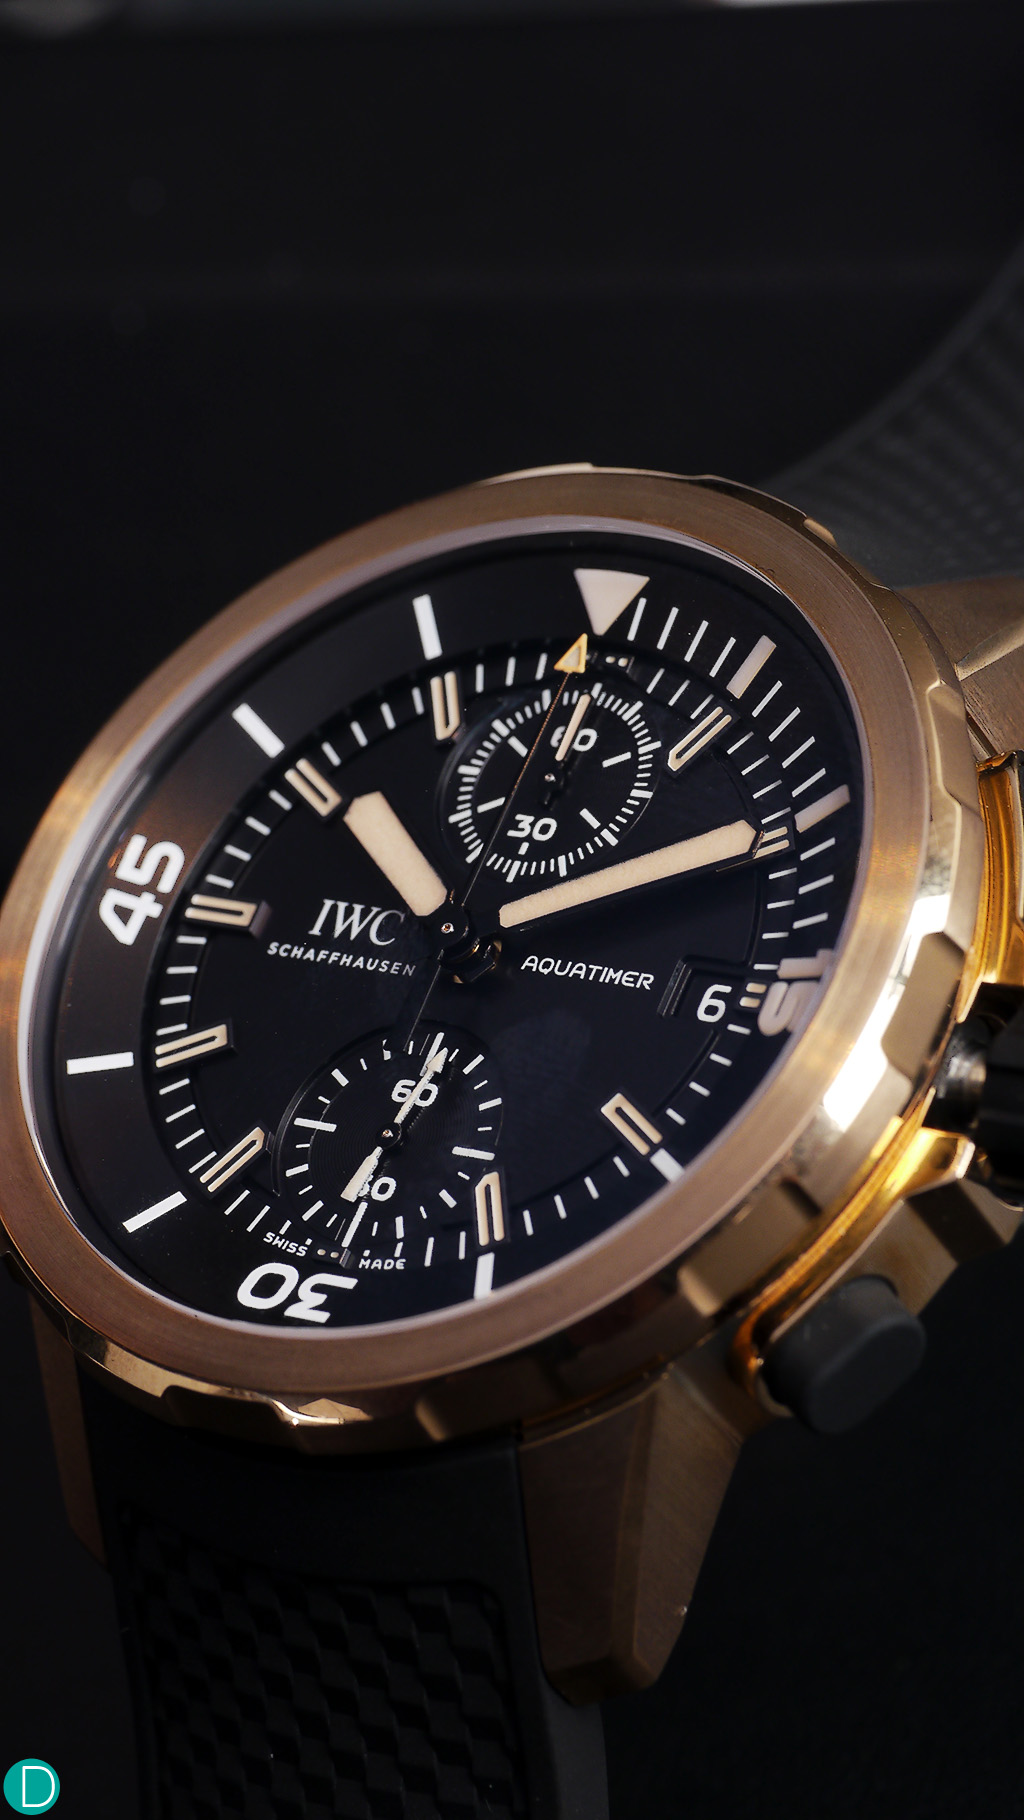 The Aquatimer in bronze, which gives the timepiece a different feel. 